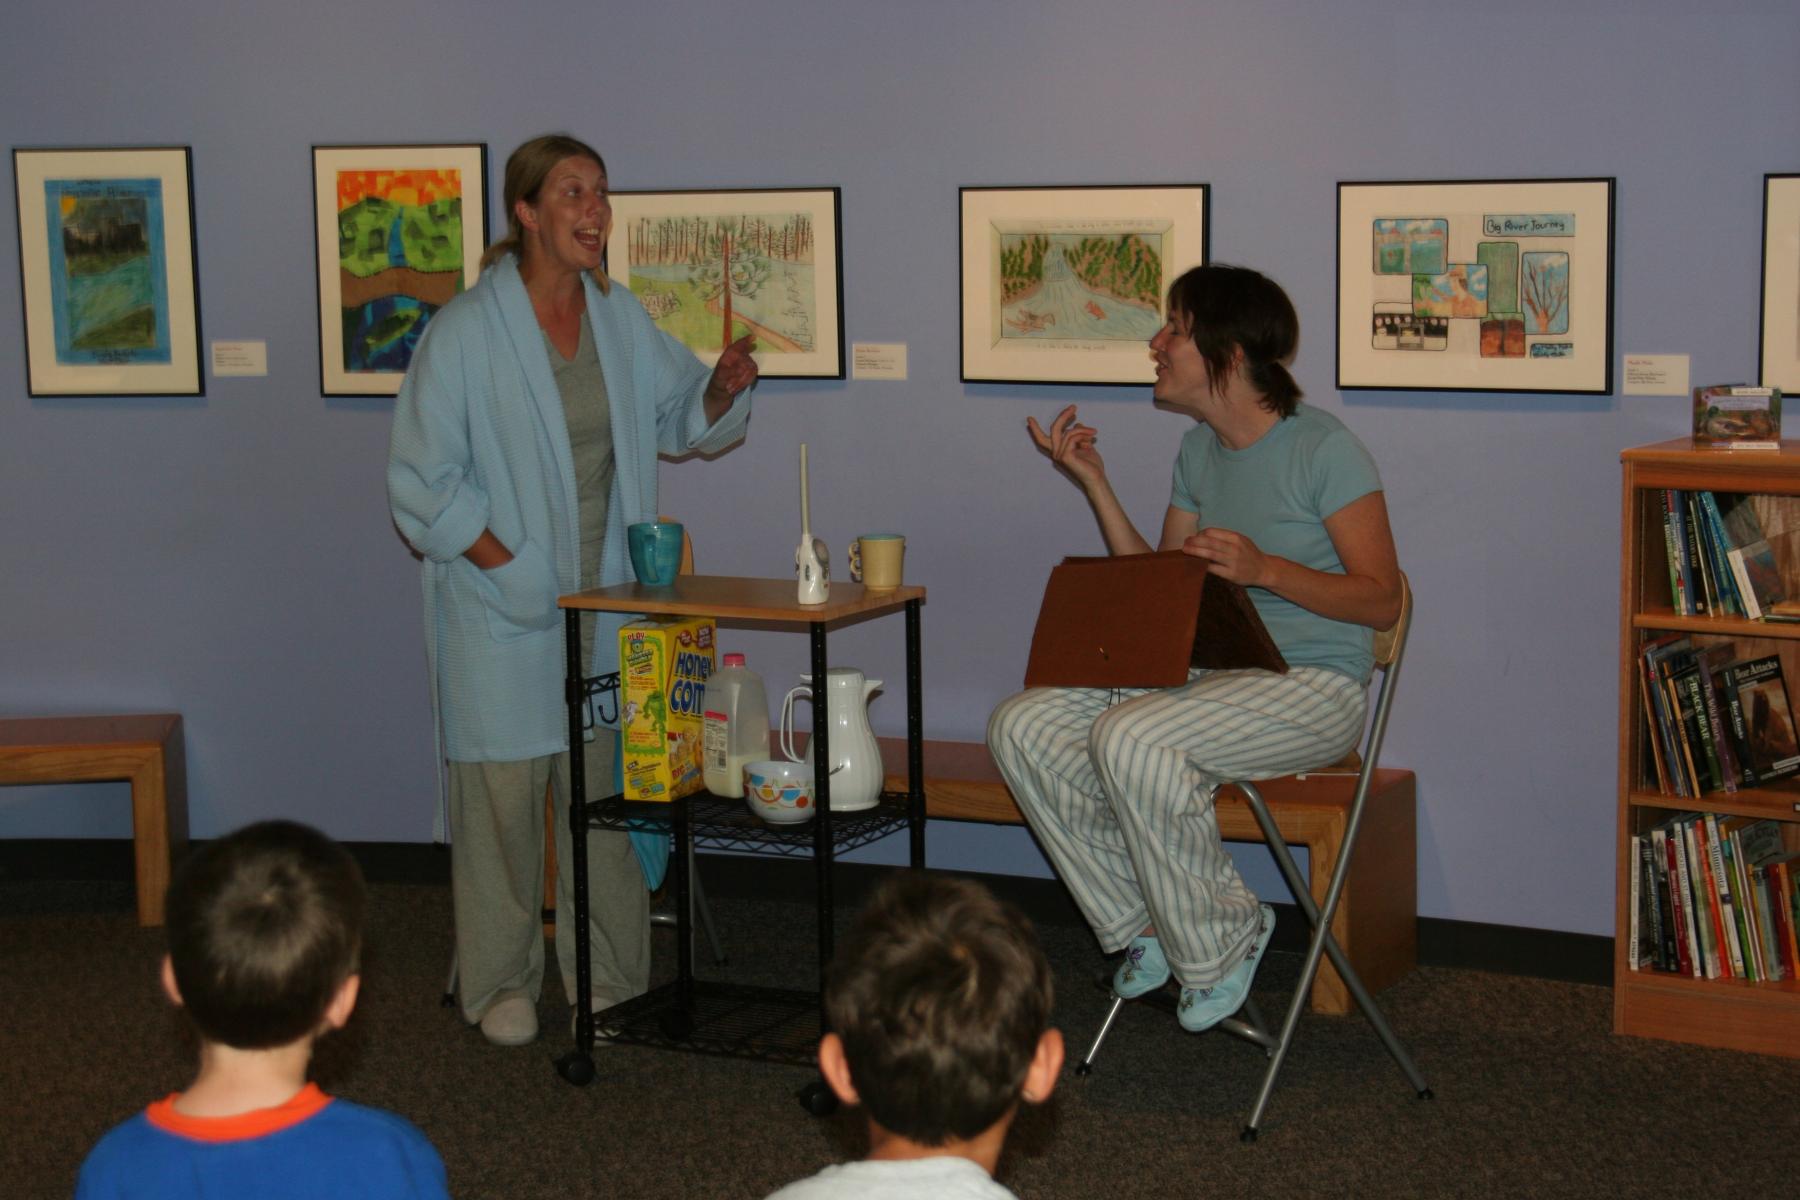 Two actors act in a play about nano and society.